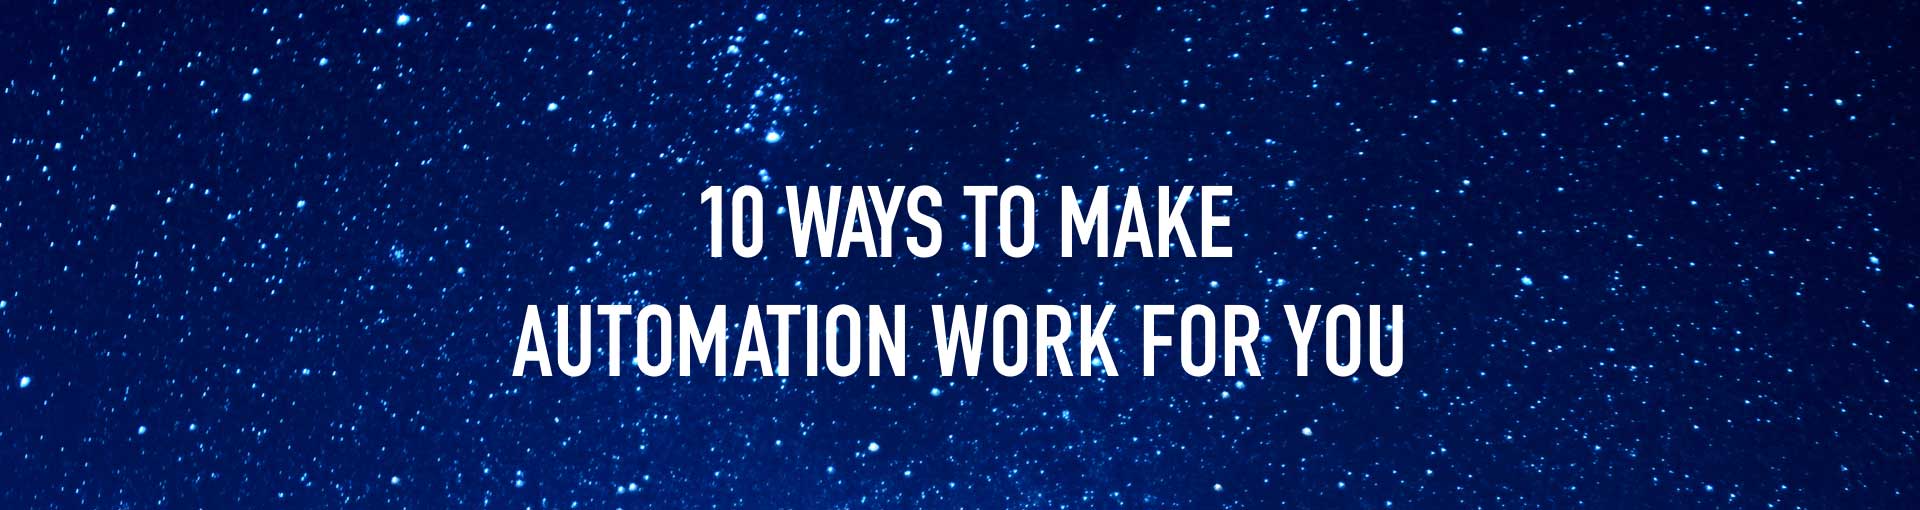 10 Ways to Make Automation Work for You Featured Image